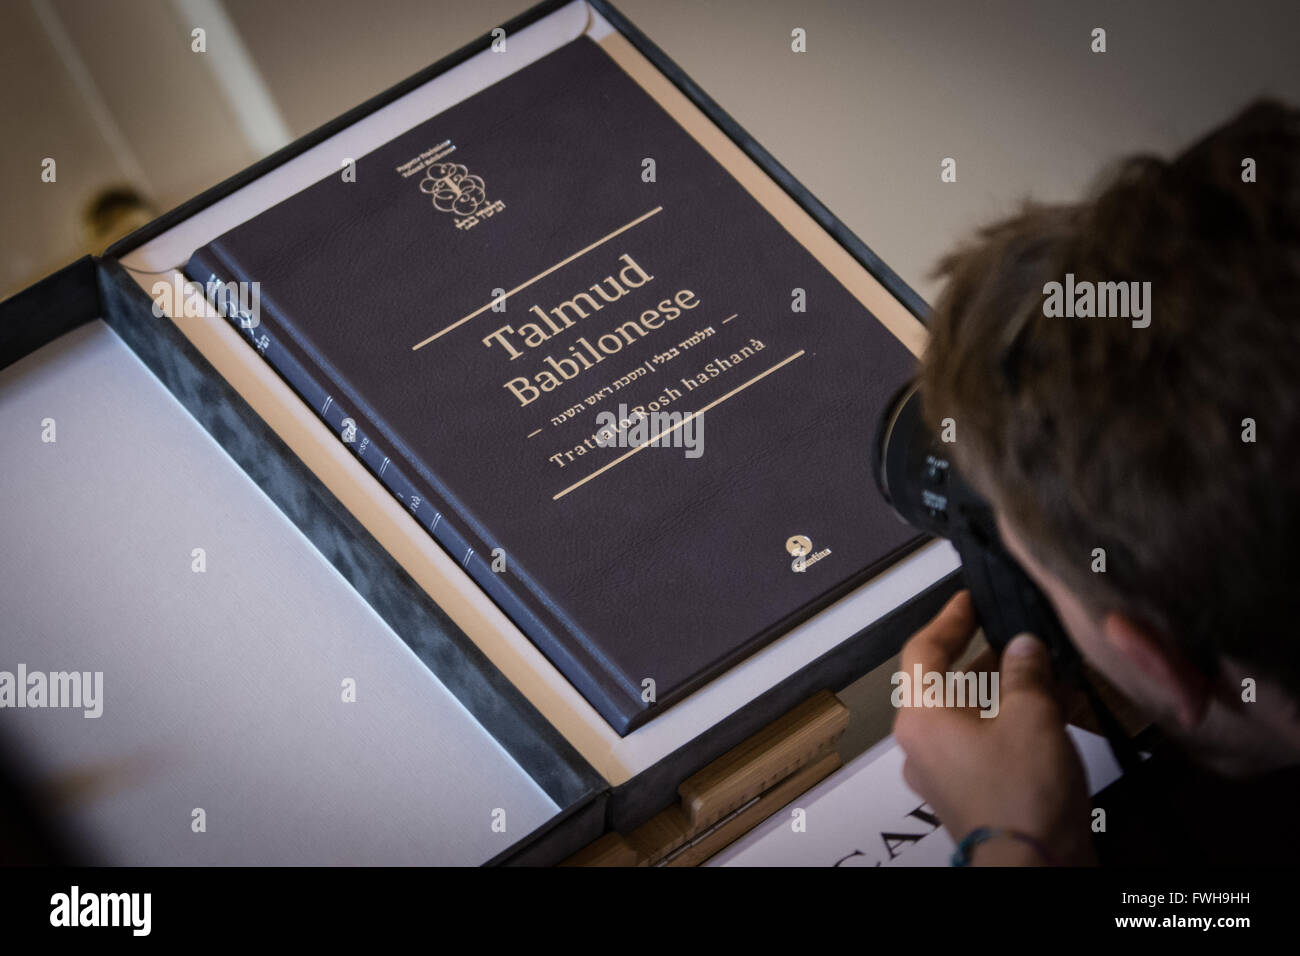 Rome, Italy. 05th Apr, 2016. Presentation of the first volume of the Talmud translated into Italian. The first copy of the translation in Italian of the Rosh Hashanah Treaty, the first volume of the Talmud, the fundamental text of Jewish tradition, was delivered to the President of the Republic Sergio Mattarella, at a presentation ceremony held at the Auditorium of Villa Farnesina, hosted by Accademia dei Lincei. © Andrea Ronchini/Pacific Press/Alamy Live News Stock Photo